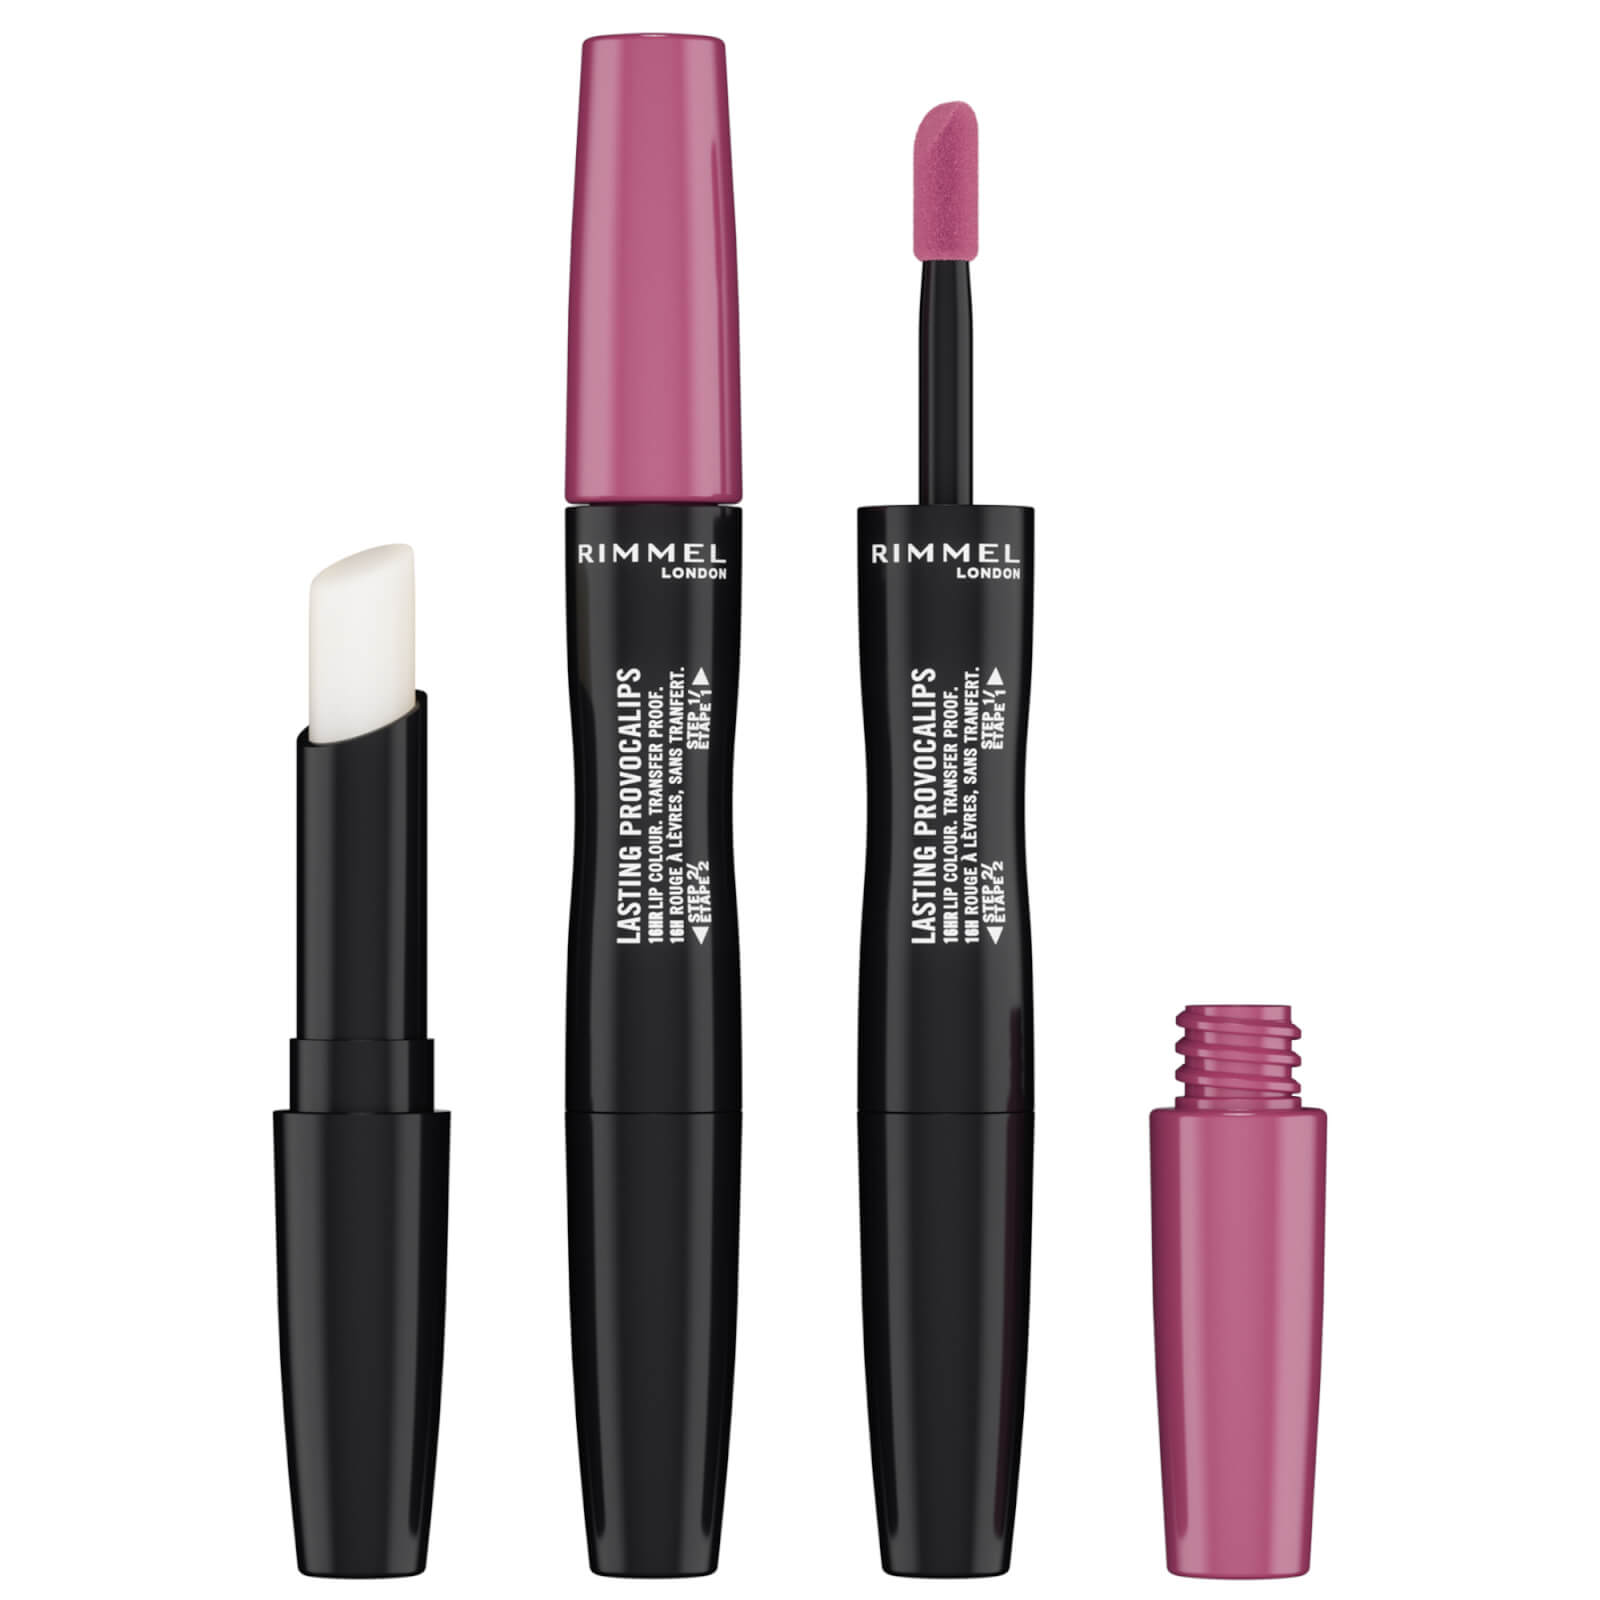 Rimmel Lasting Finish Provocalips 2ml (Various Shades) - 410 Pinky Promise